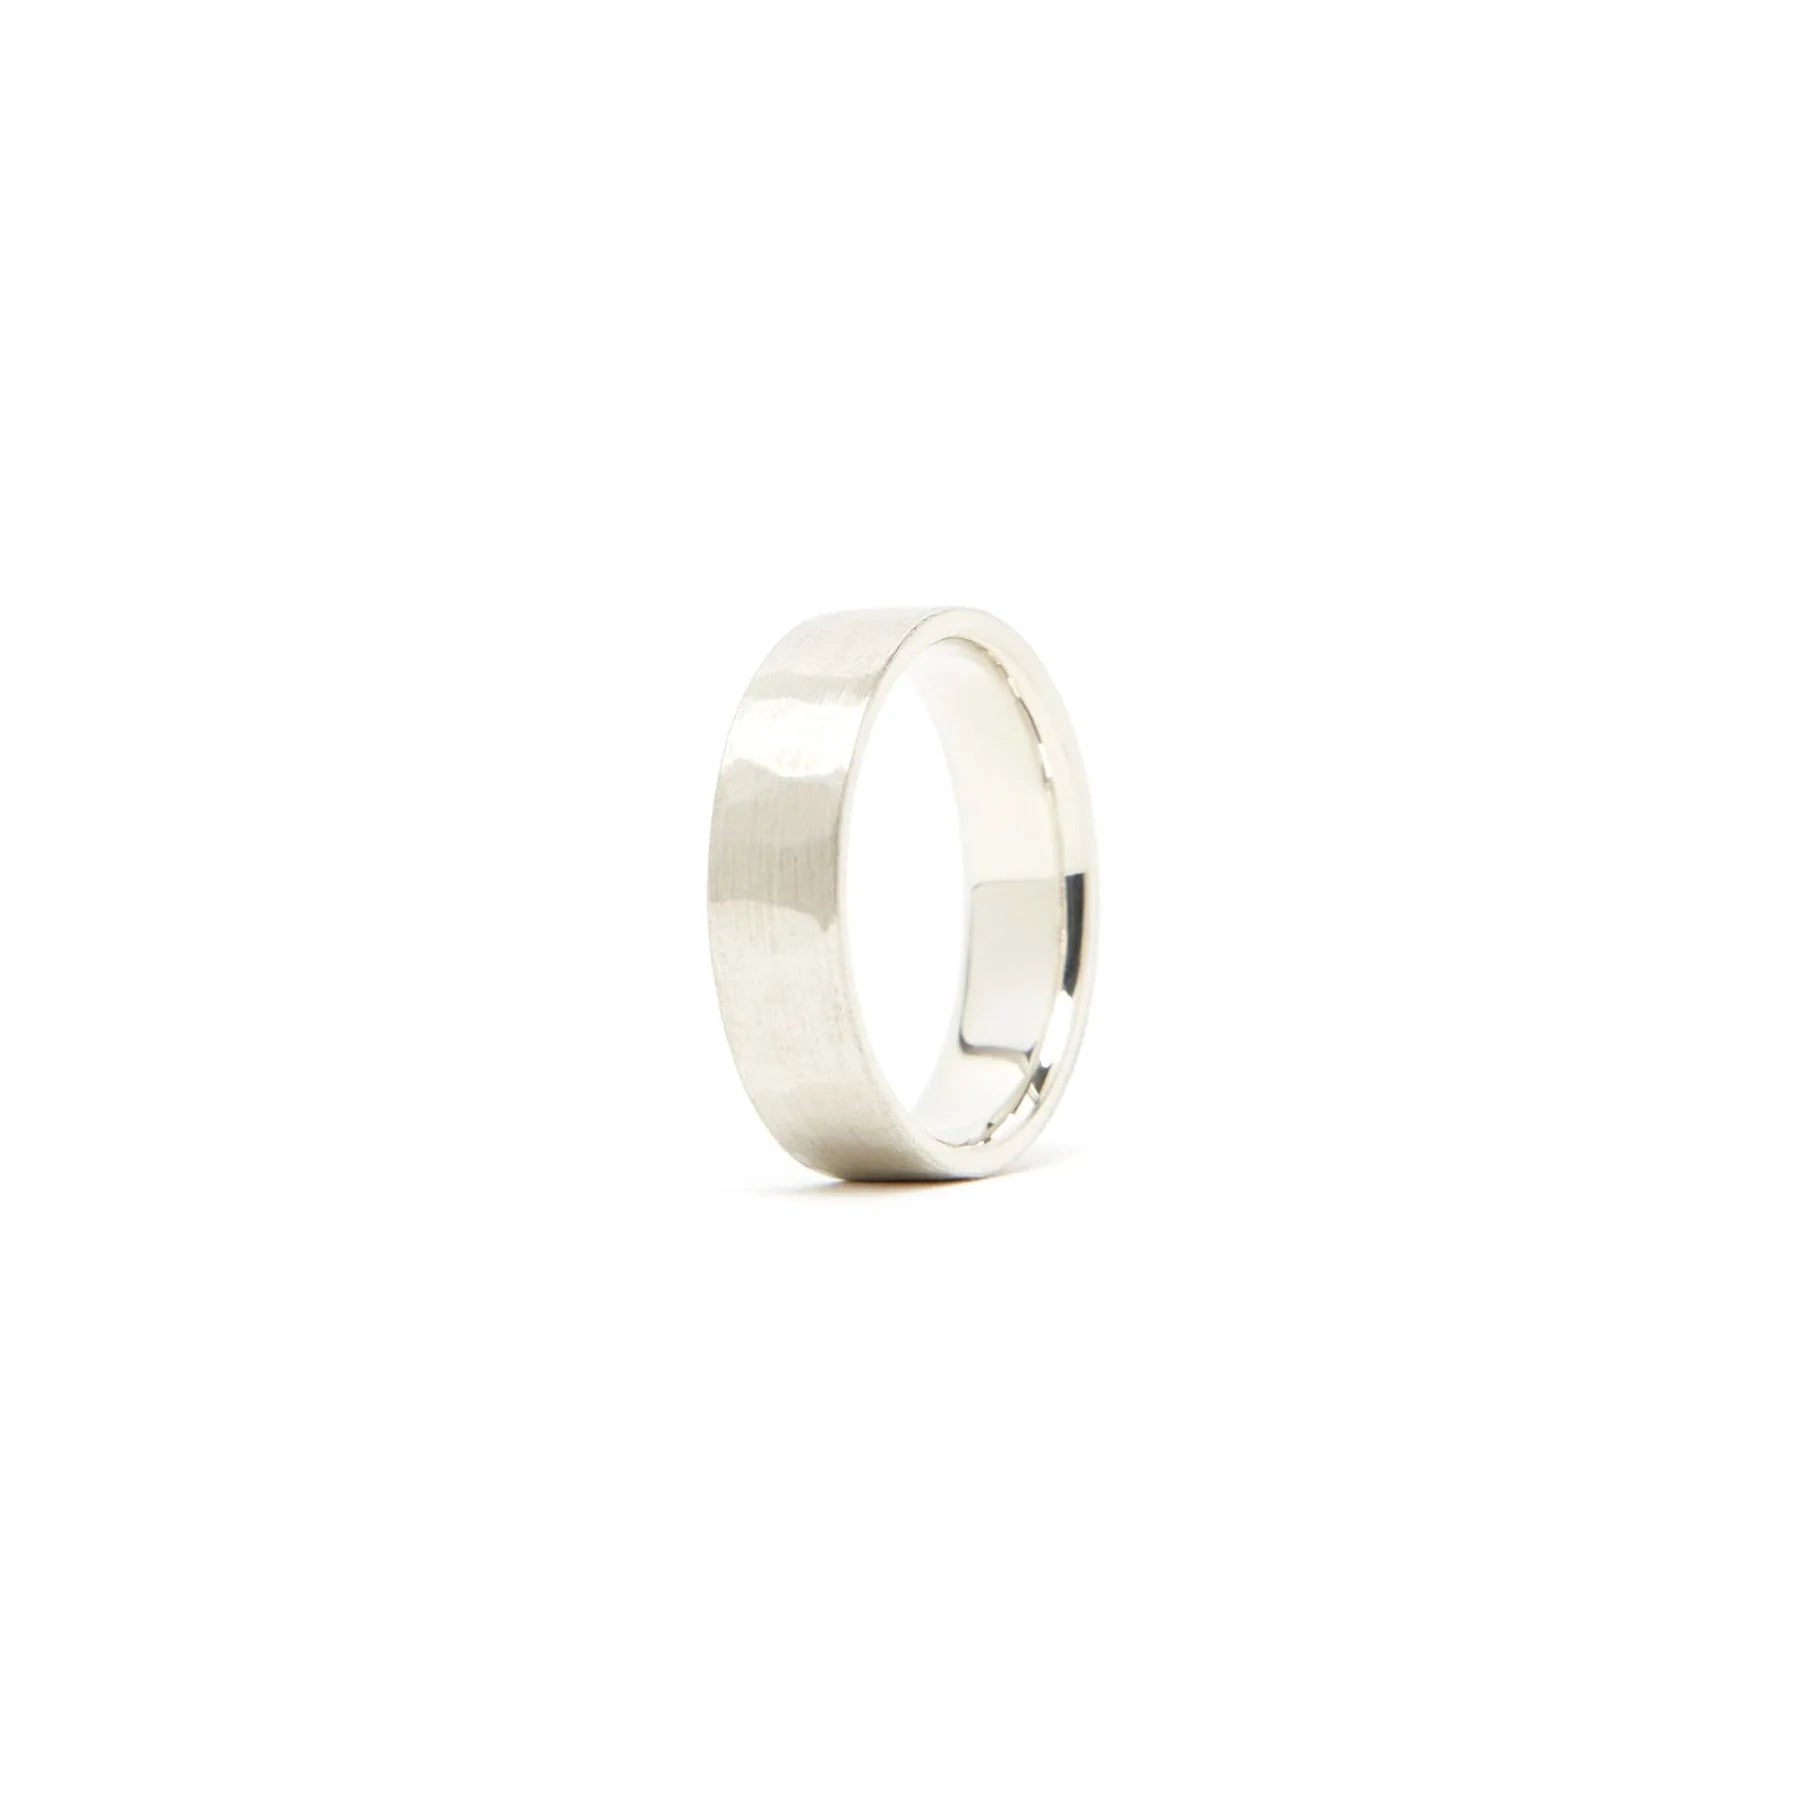 Studebaker - Classic Band 6mm - Sterling Silver-Men's Accessories-M-Yaletown-Vancouver-Surrey-Canada